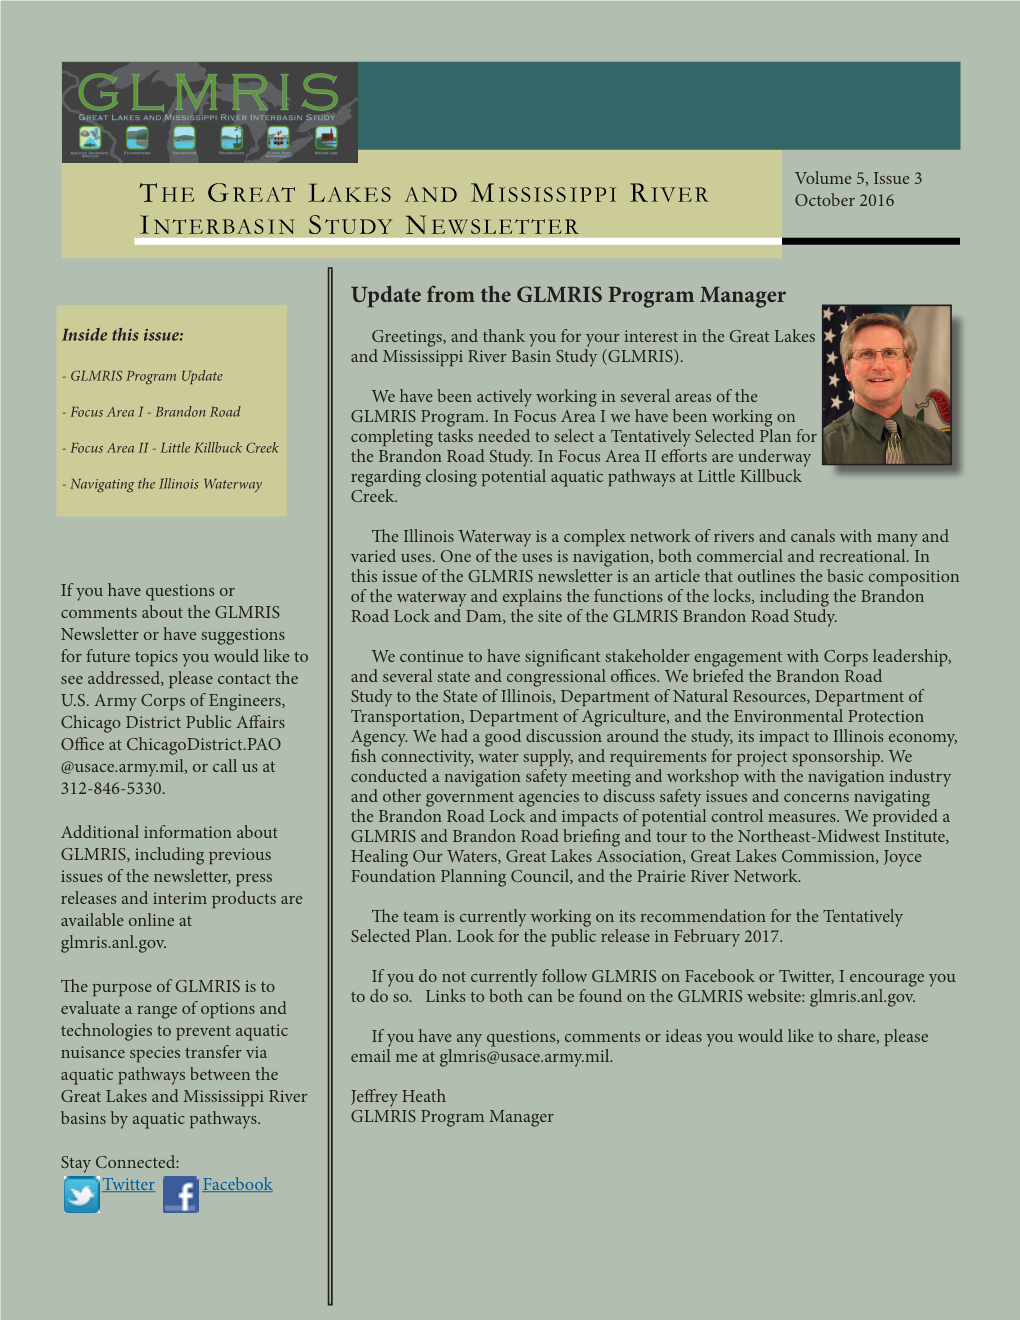 The Great Lakes and Mississippi River Interbasin Study Newsletter